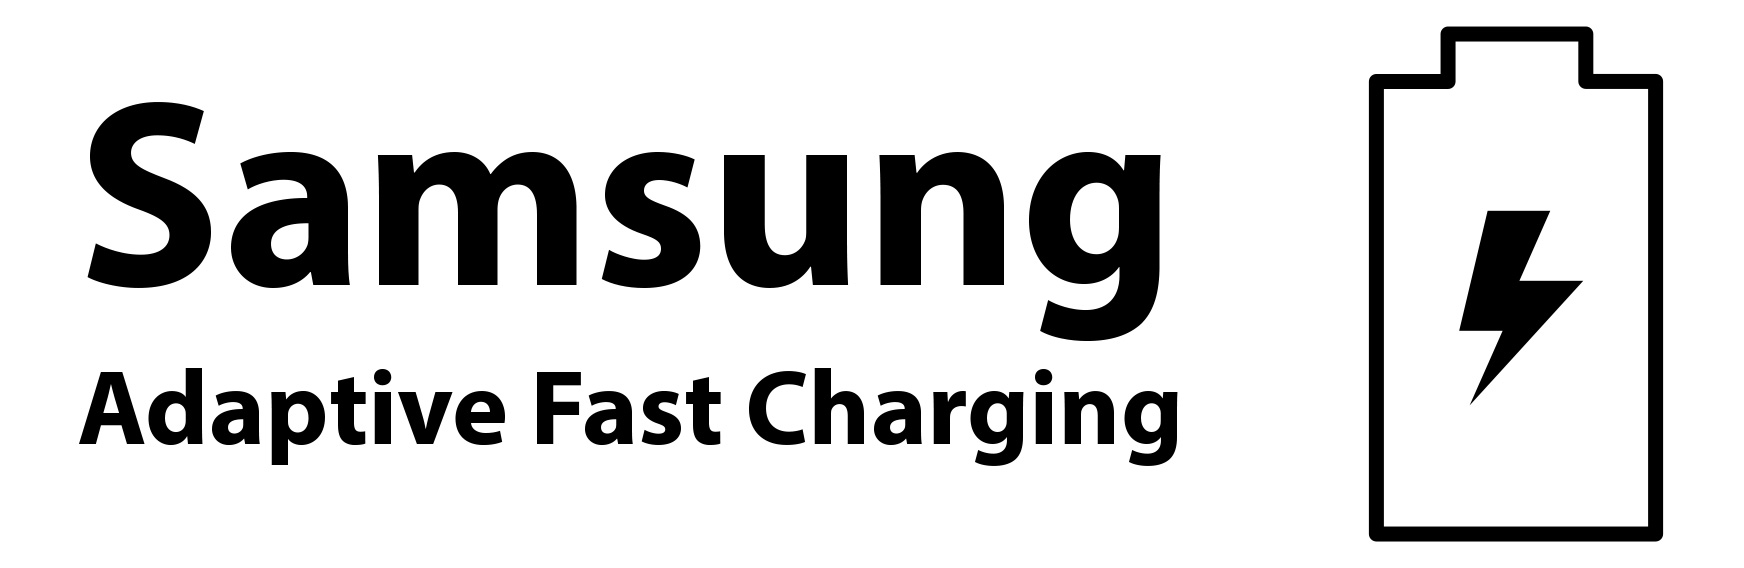 Samsung fast charger - adaptive chargers for Android devices